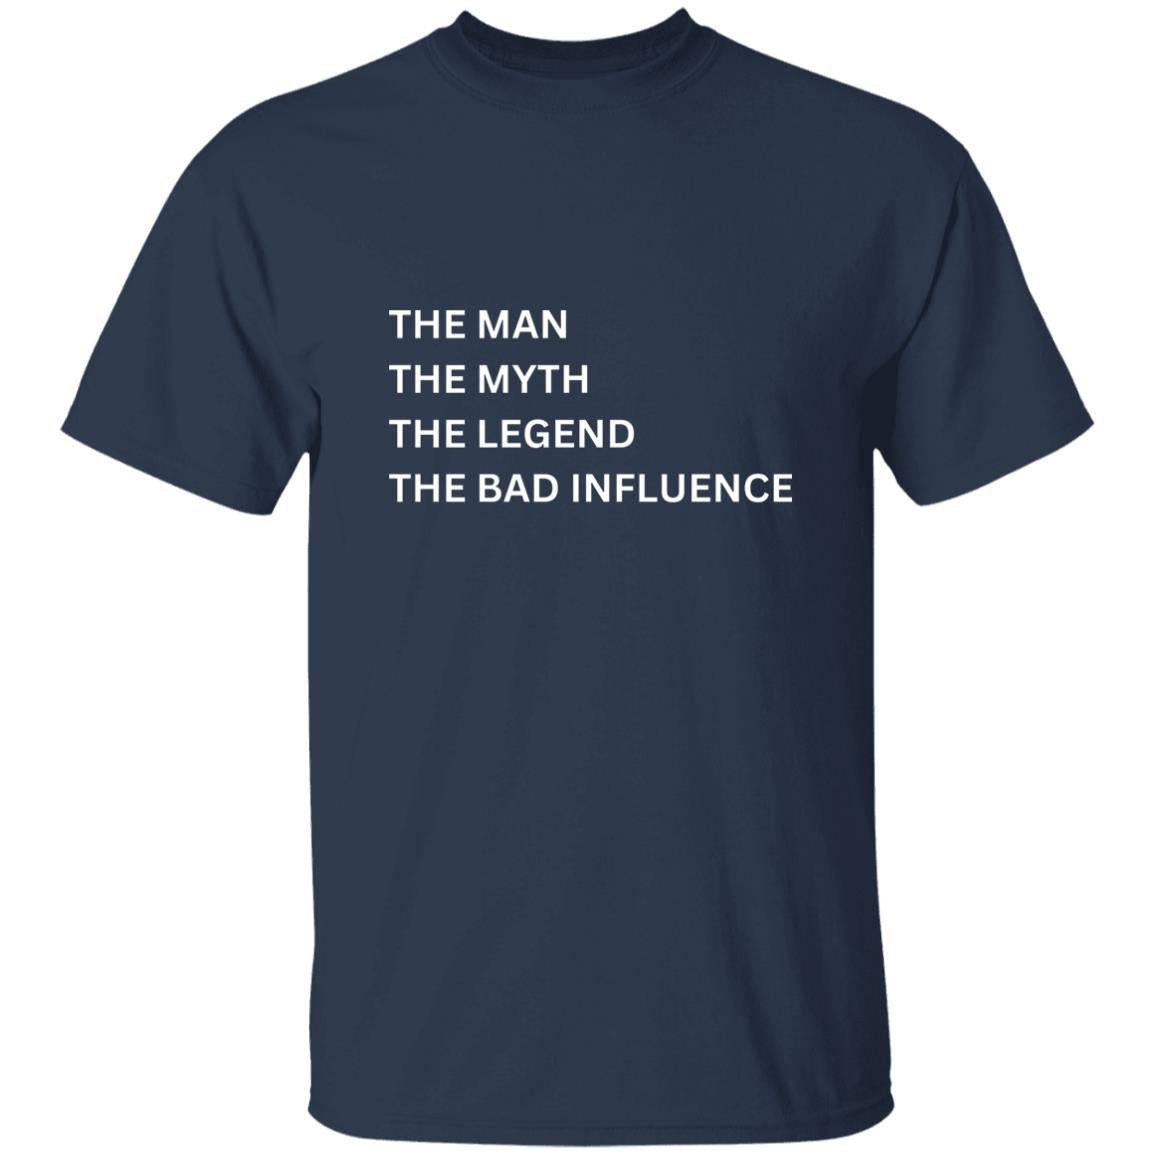 Front of the navy Man, Myth, Legend t-shirt. Material is heavyweight 100% cotton in a classic unisex t-shirt style. Printed in white letters on the chest in a list-style is the phrase: "THE MAN, THE MYTH, THE LEGEND, THE BAD INFLUENCE"